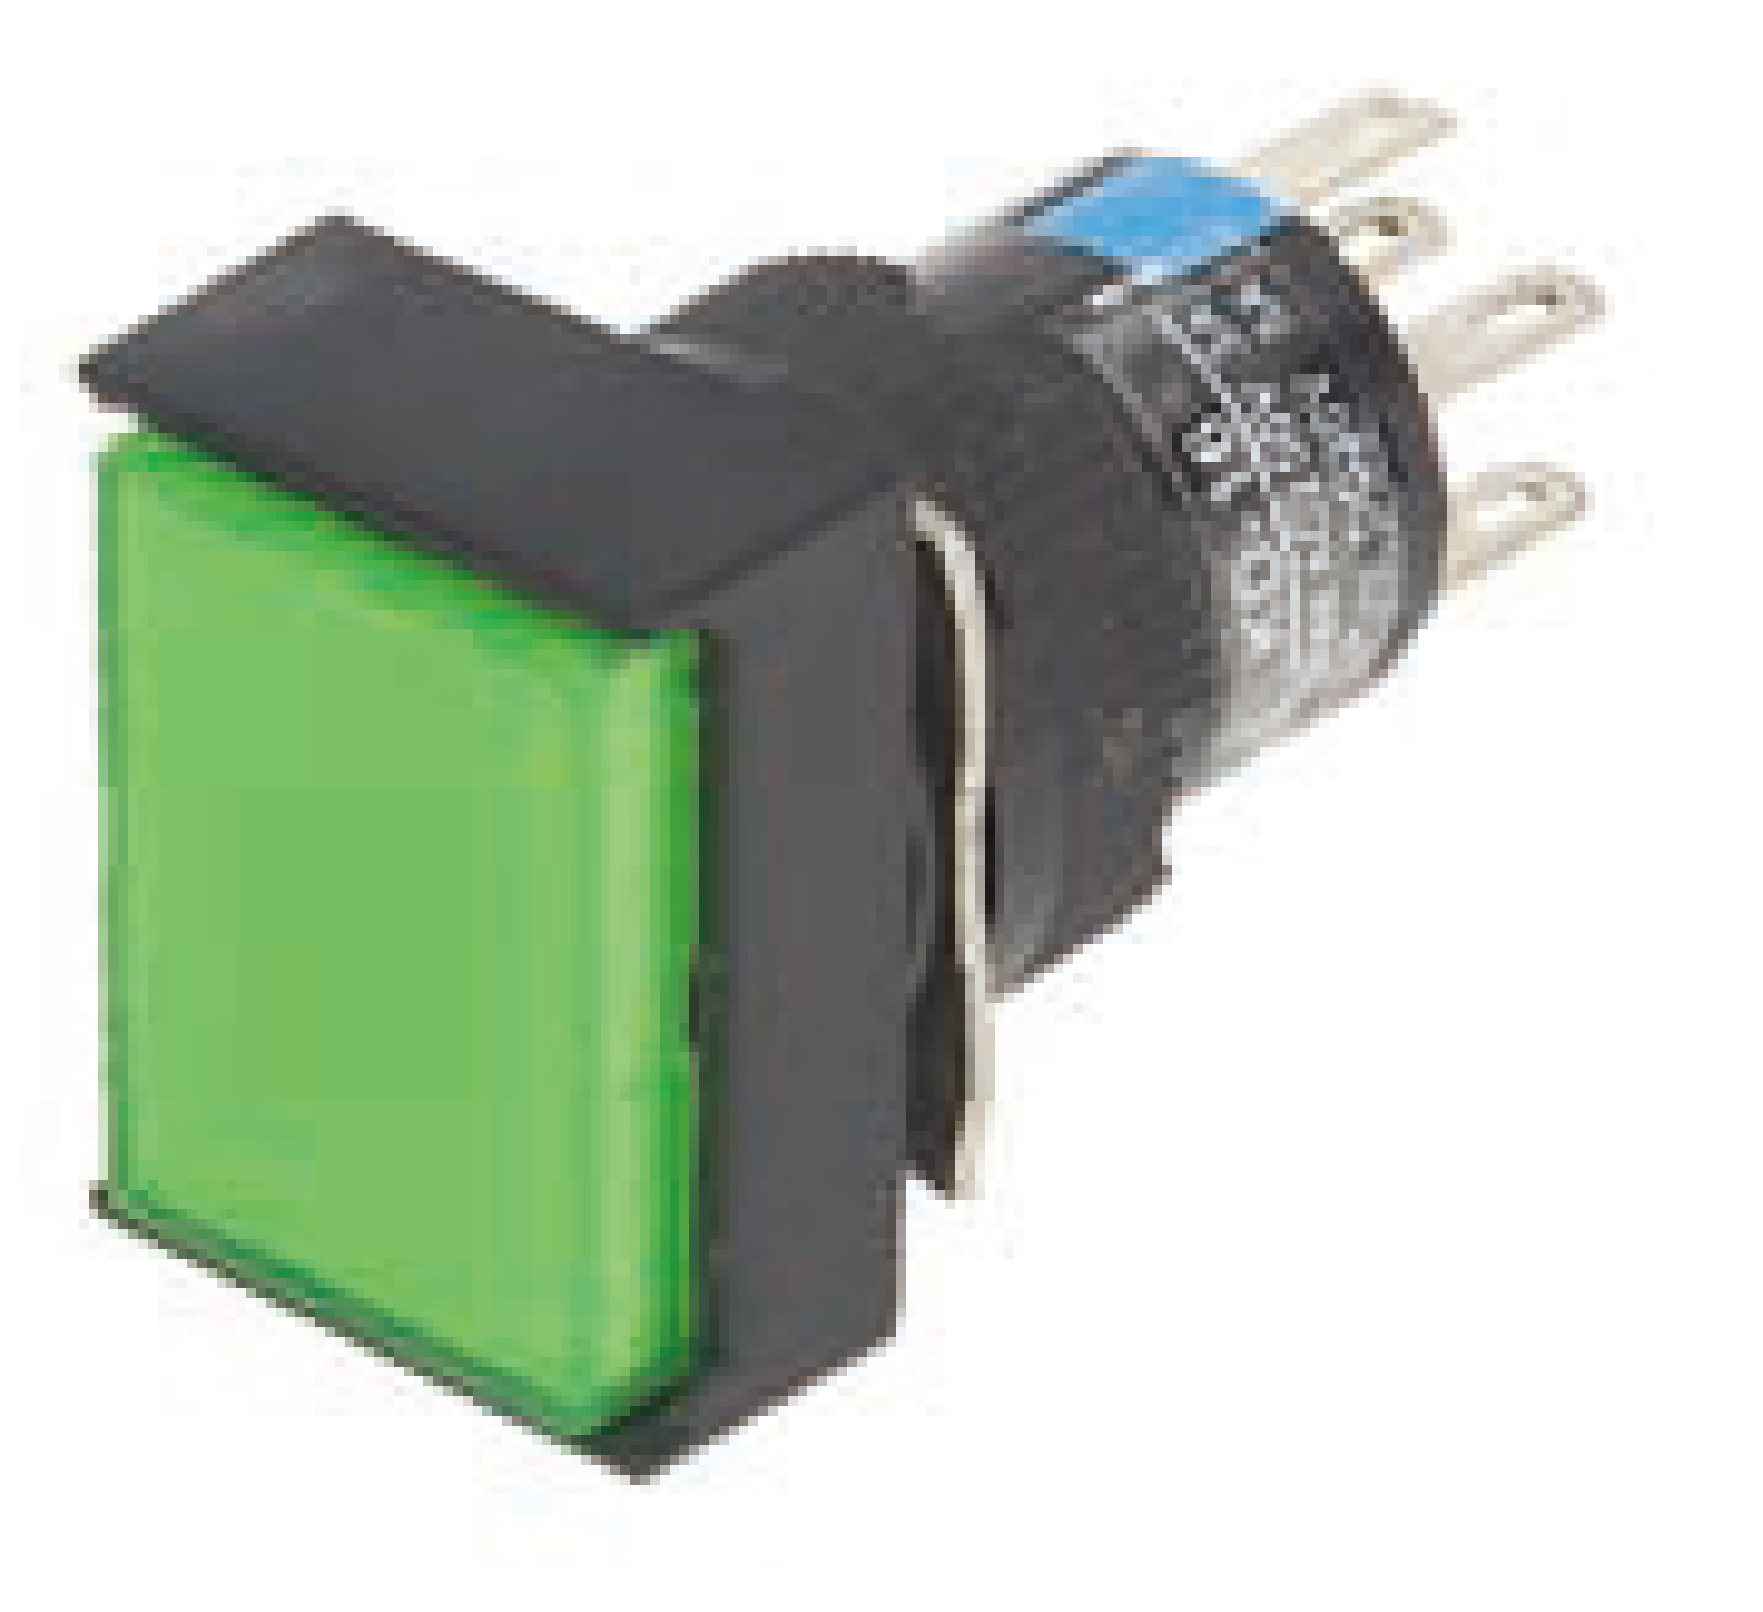 EBSE6 Series Pushbutton Switch And Indicator Light